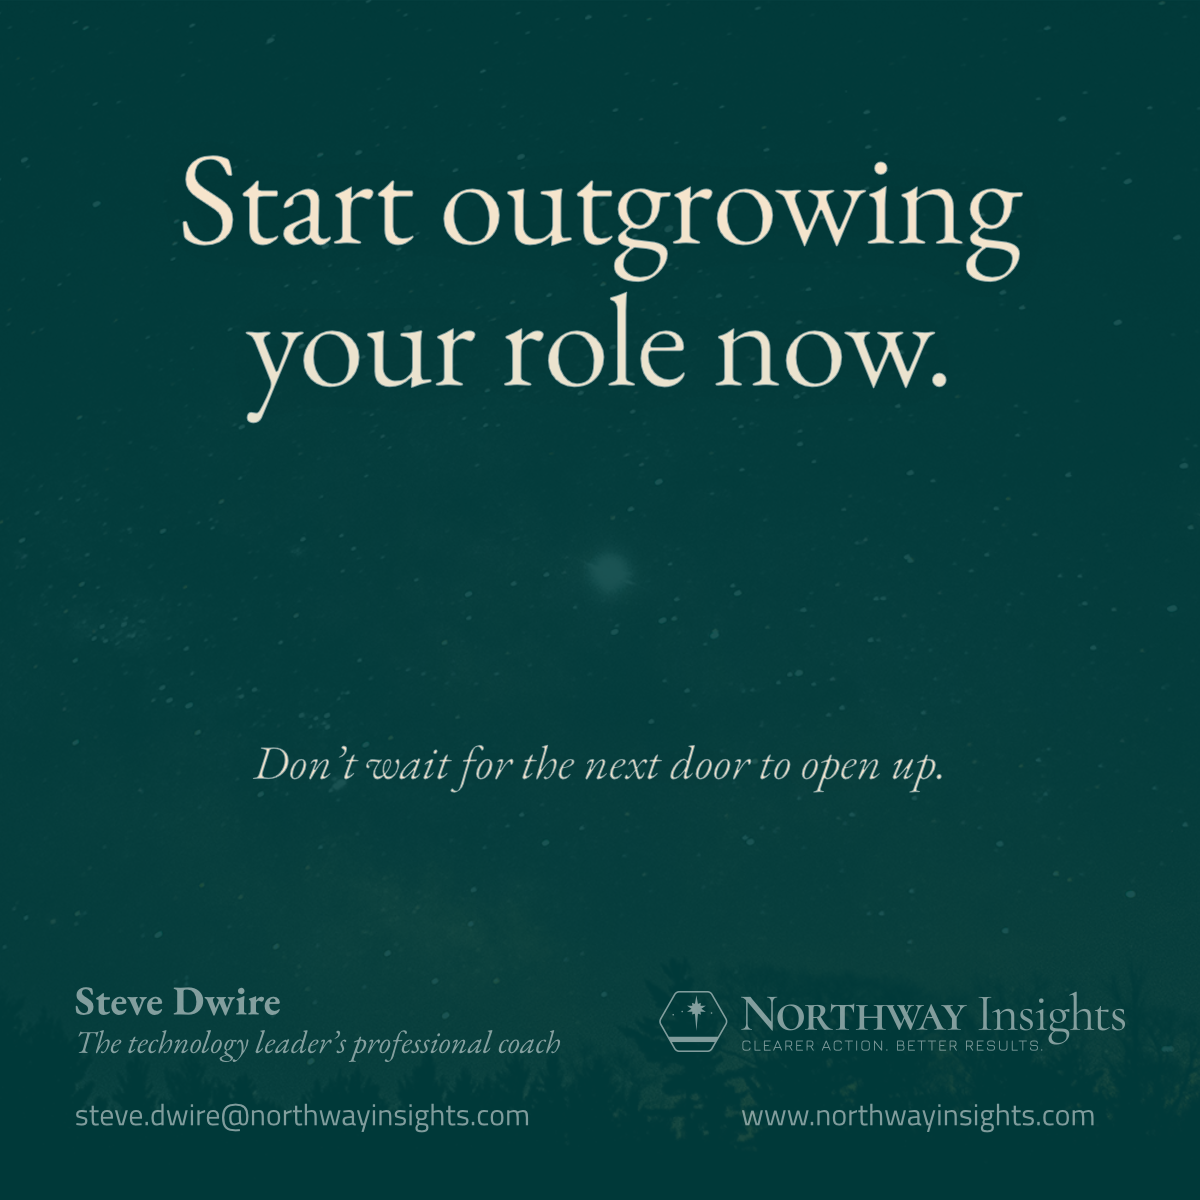 Start outgrowing your role now.